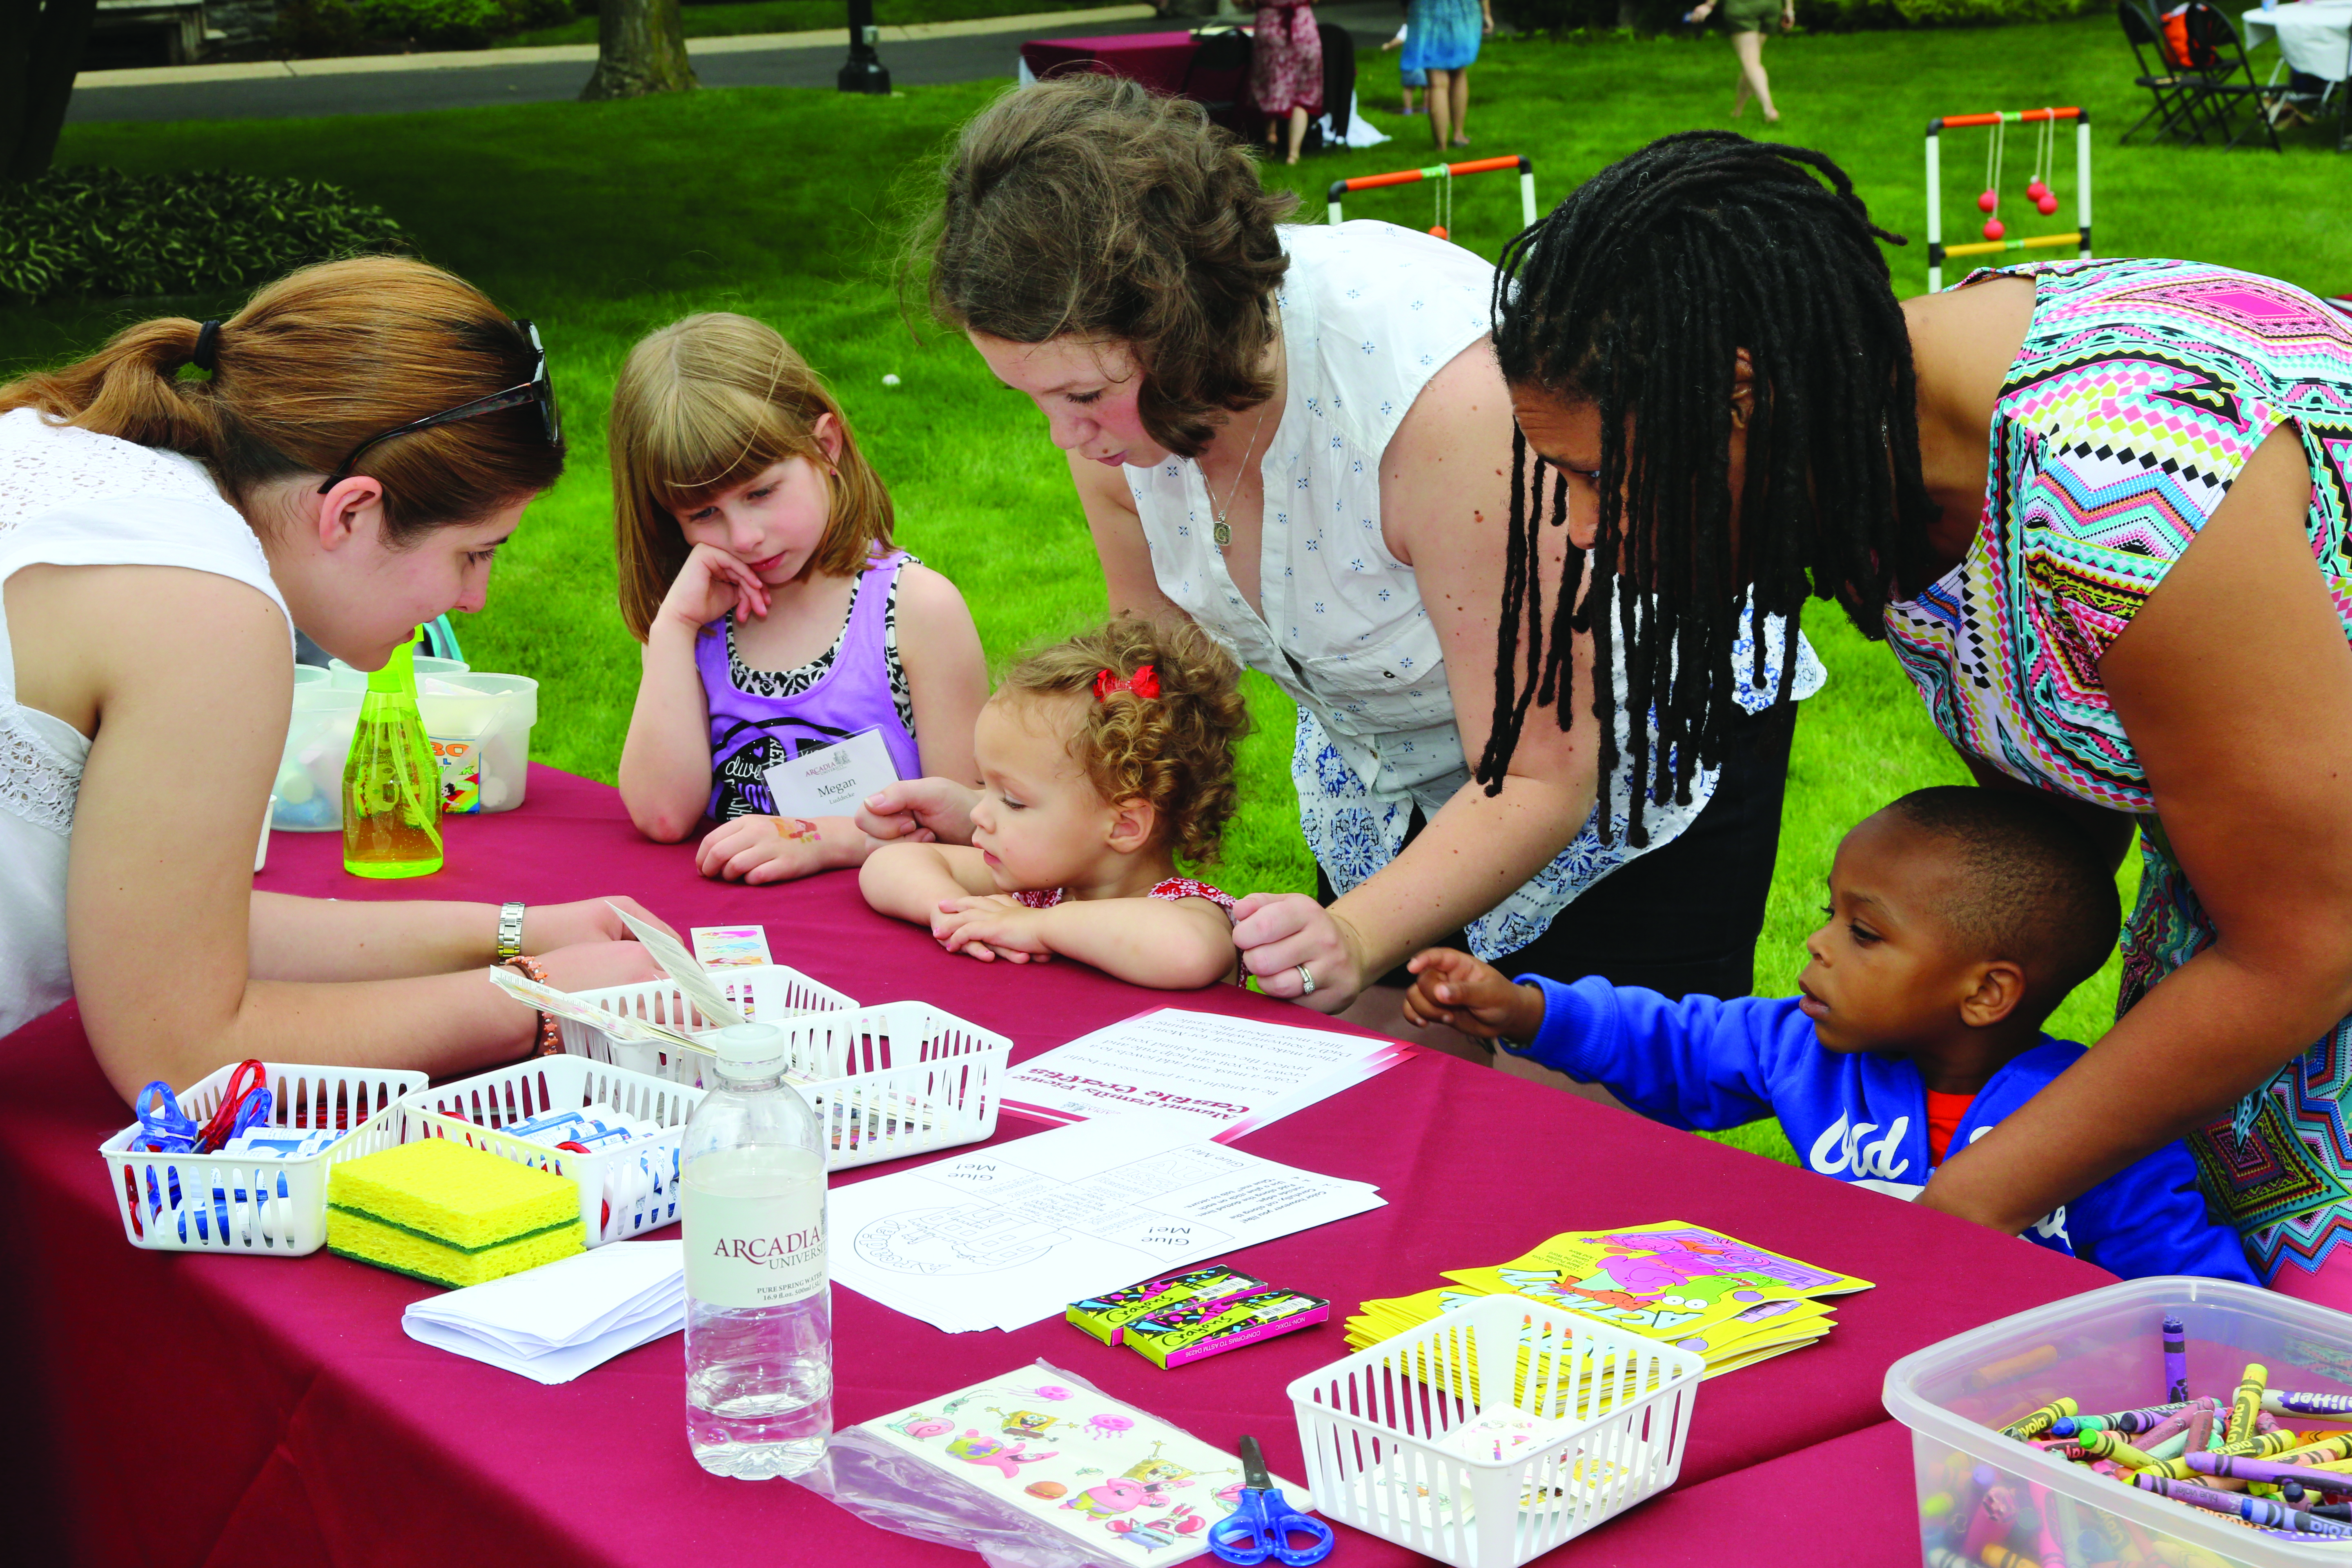 Alumni students with their young children at a craft table.